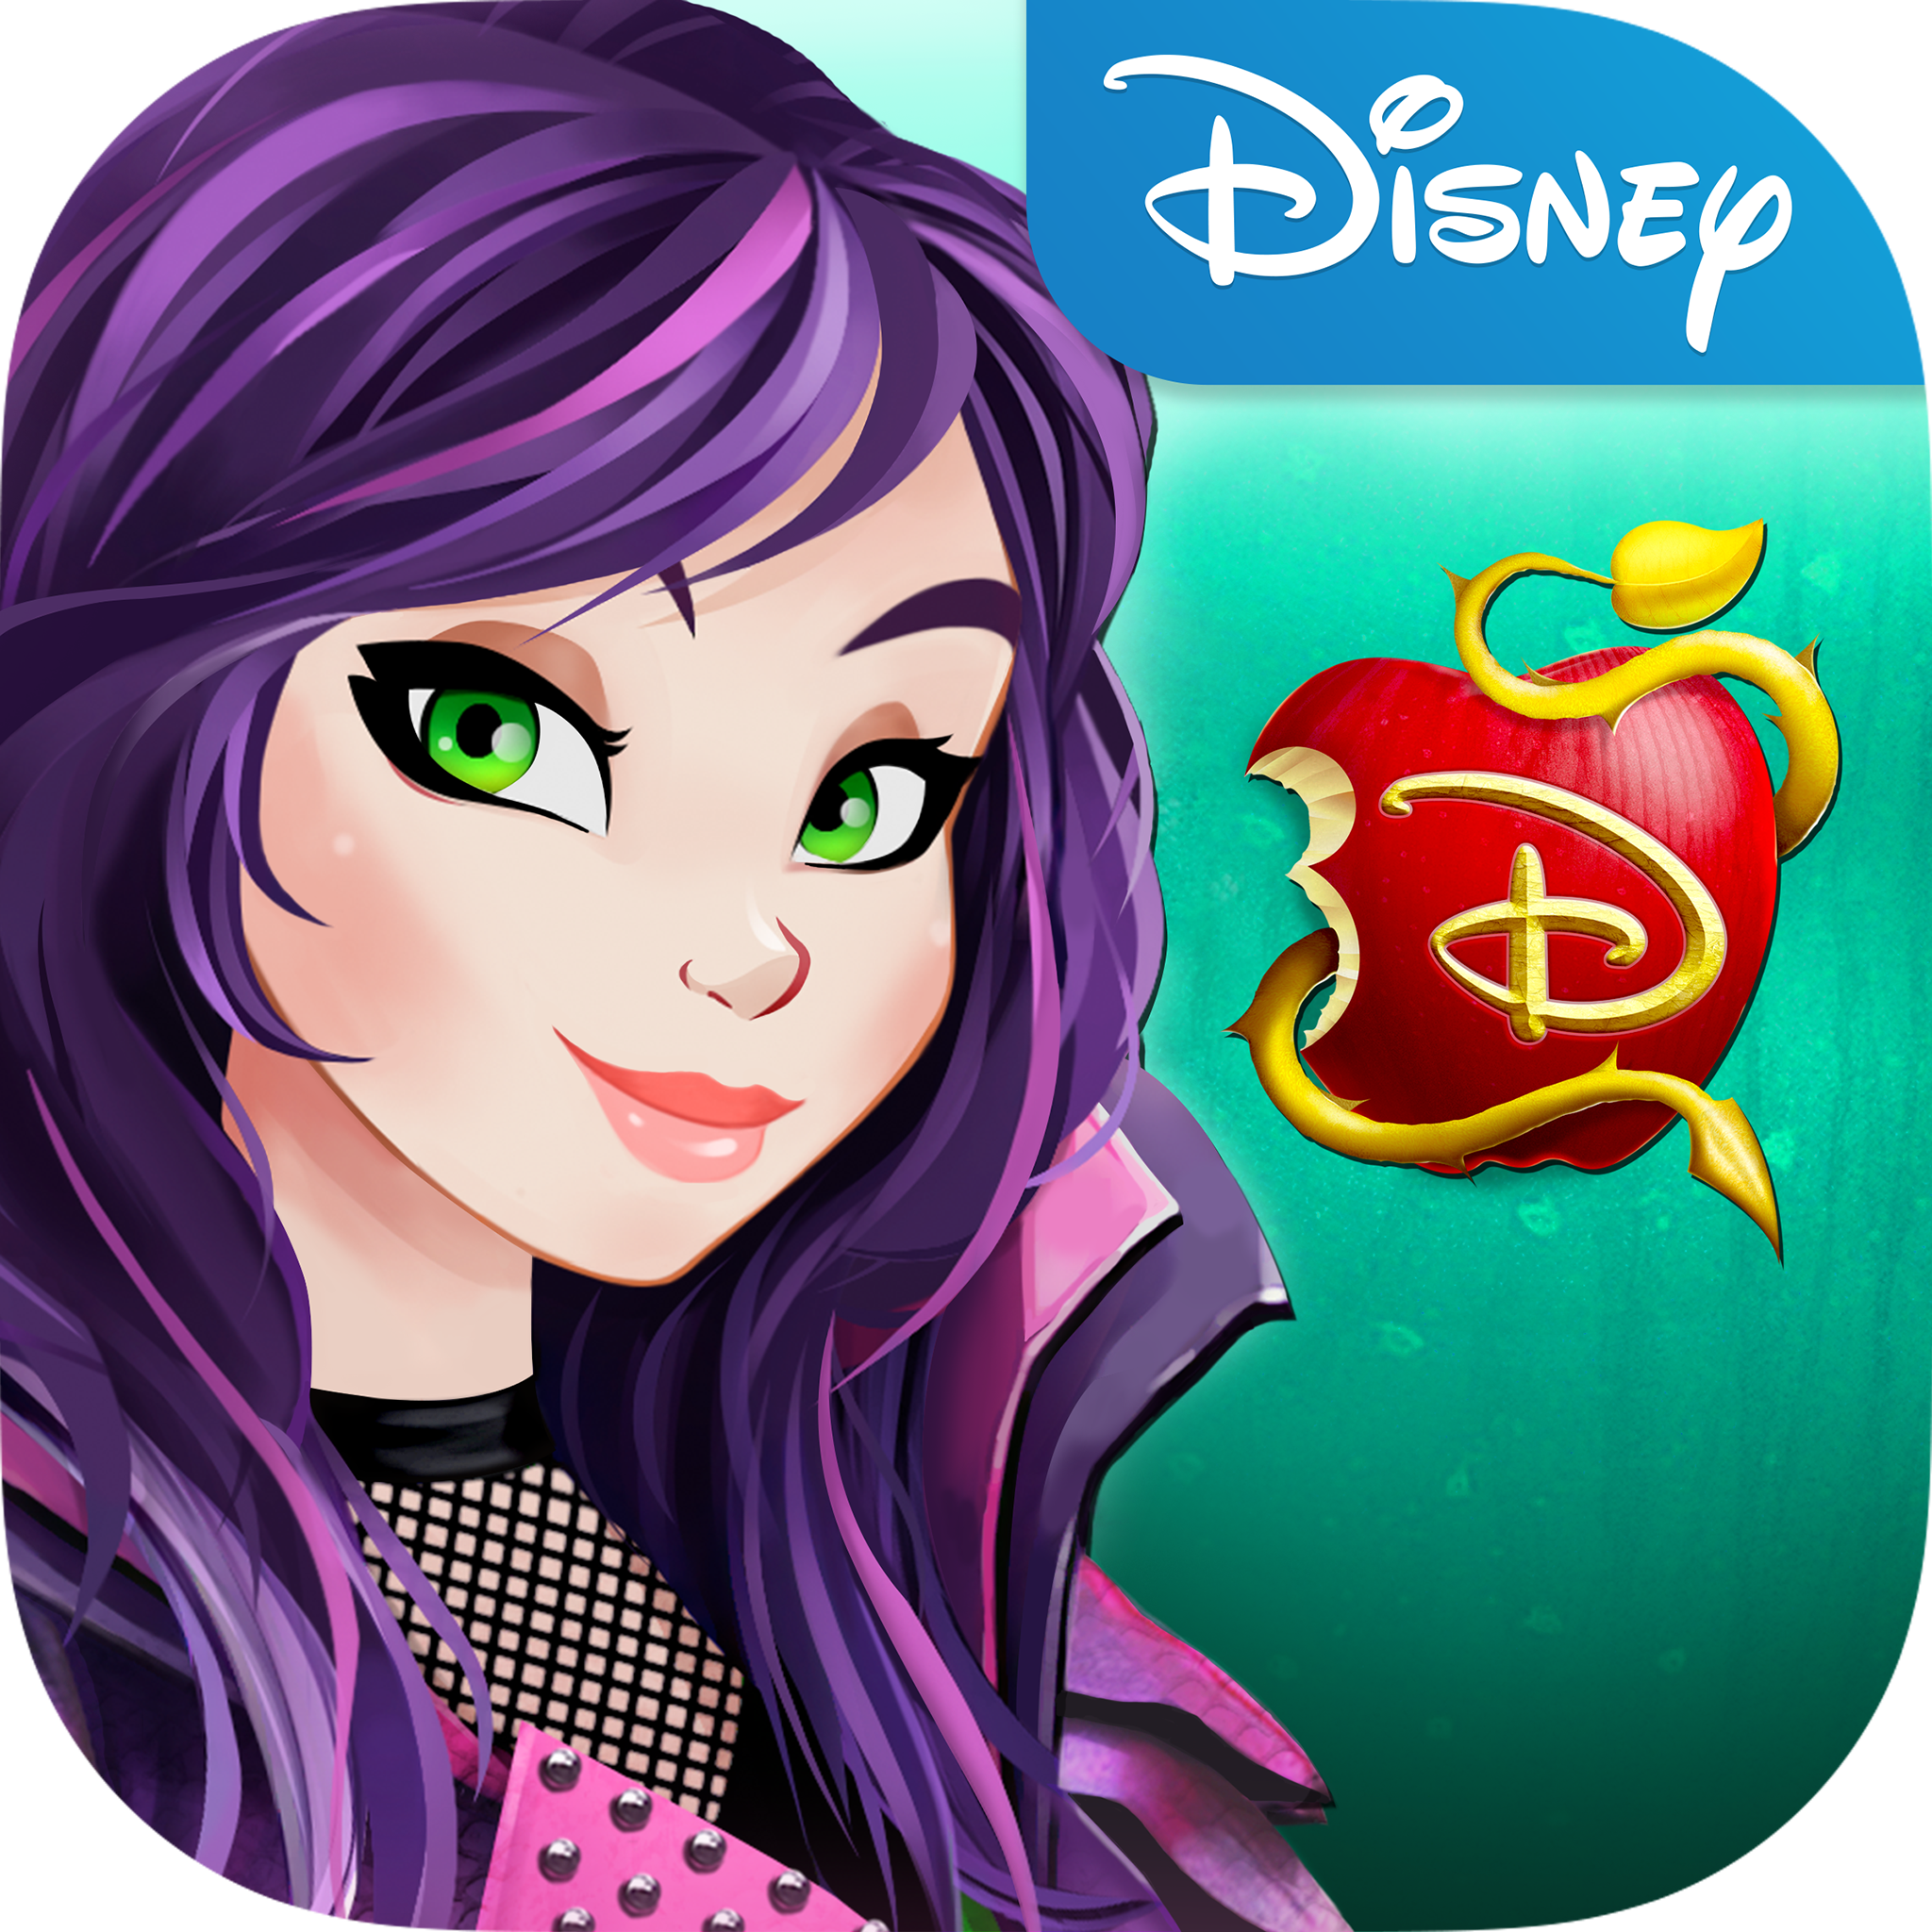 Disney.com | The official home for all things Disney